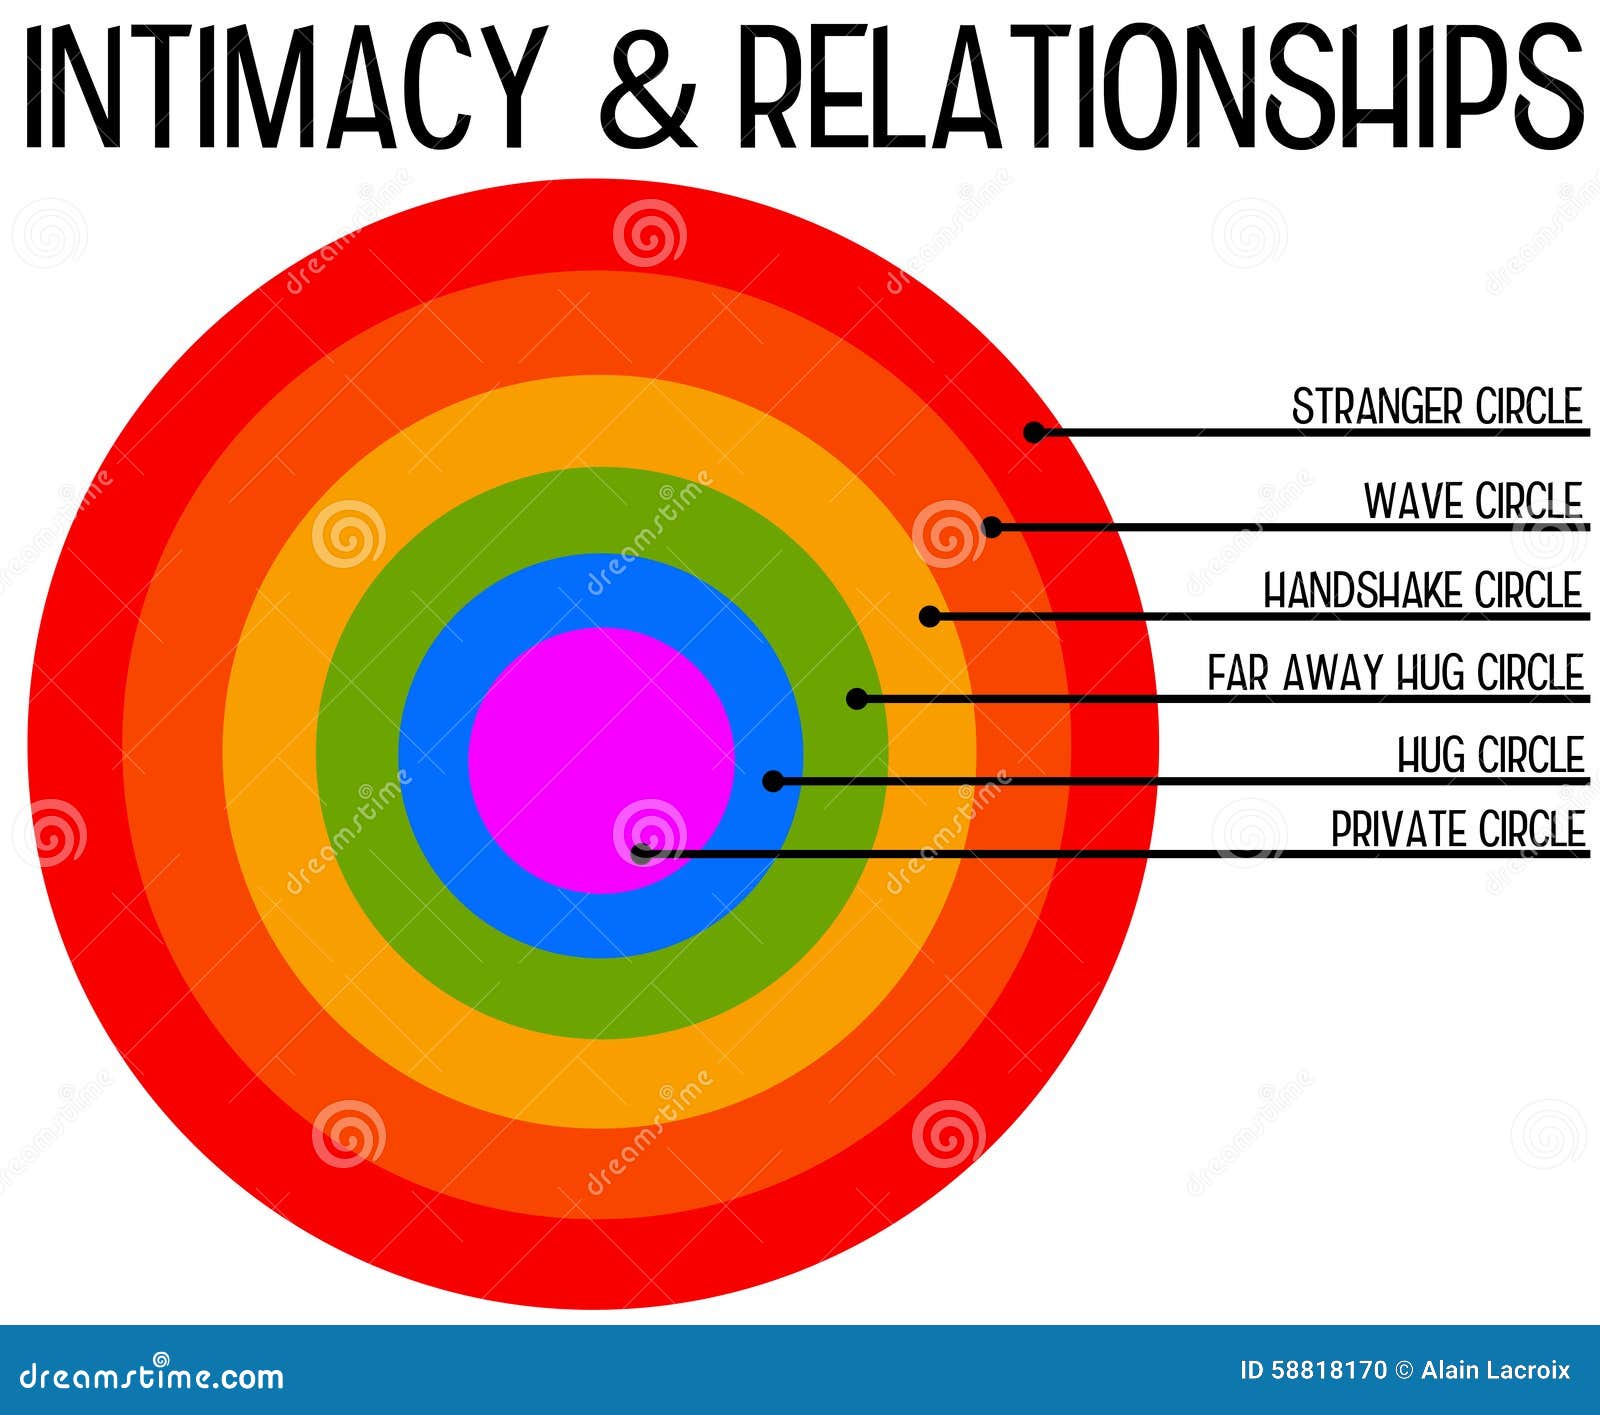 https://thumbs.dreamstime.com/z/relationships-different-levels-stages-circles-intimacy-58818170.jpg